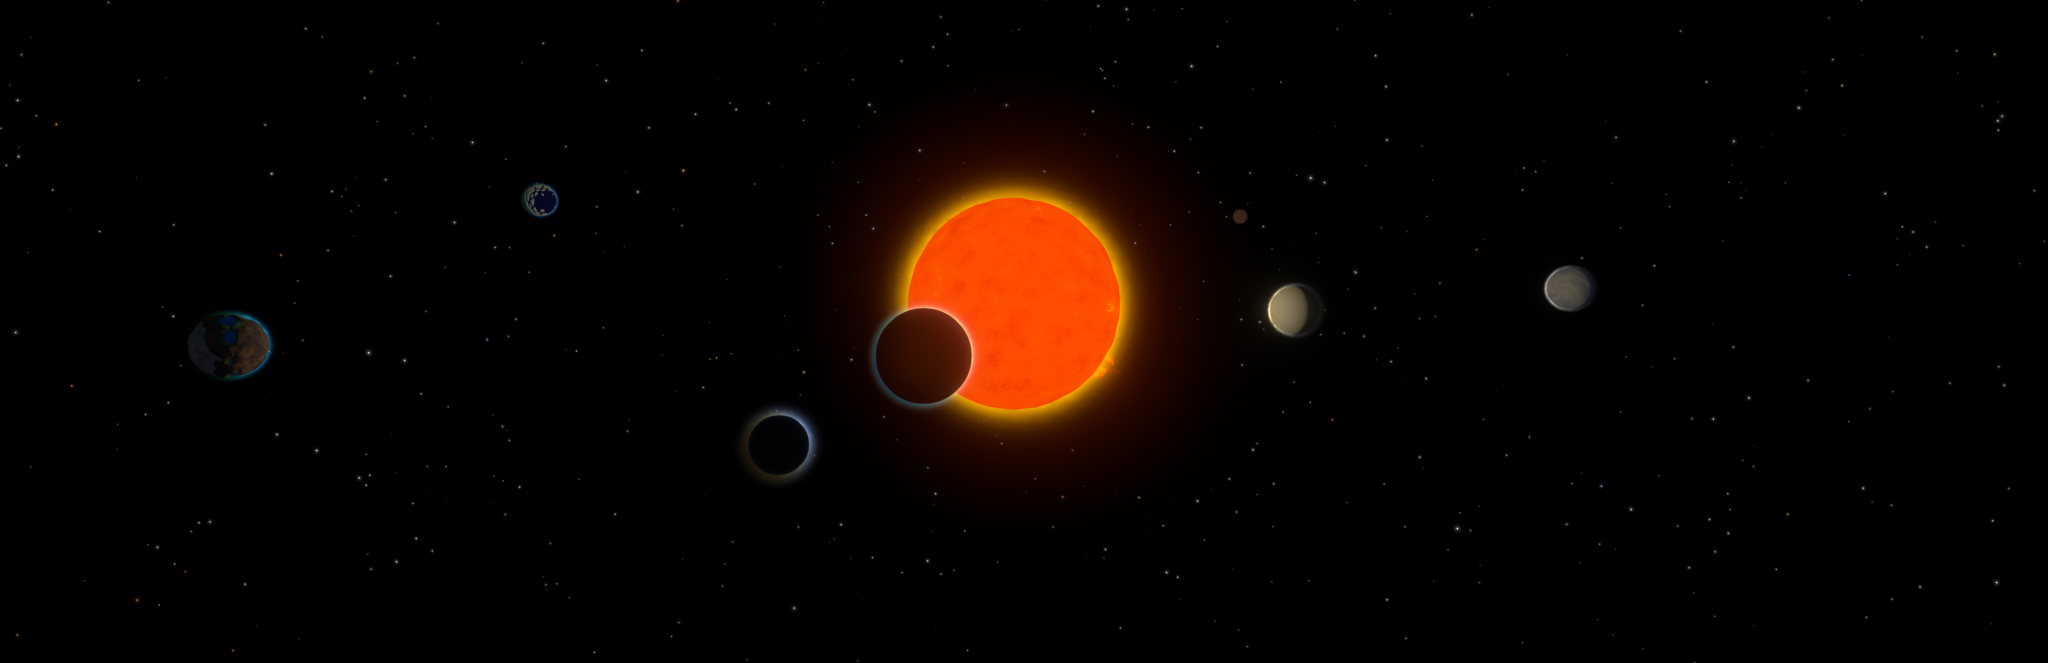 Screenshot of Trappist-1 by smallbug made with New Horizons